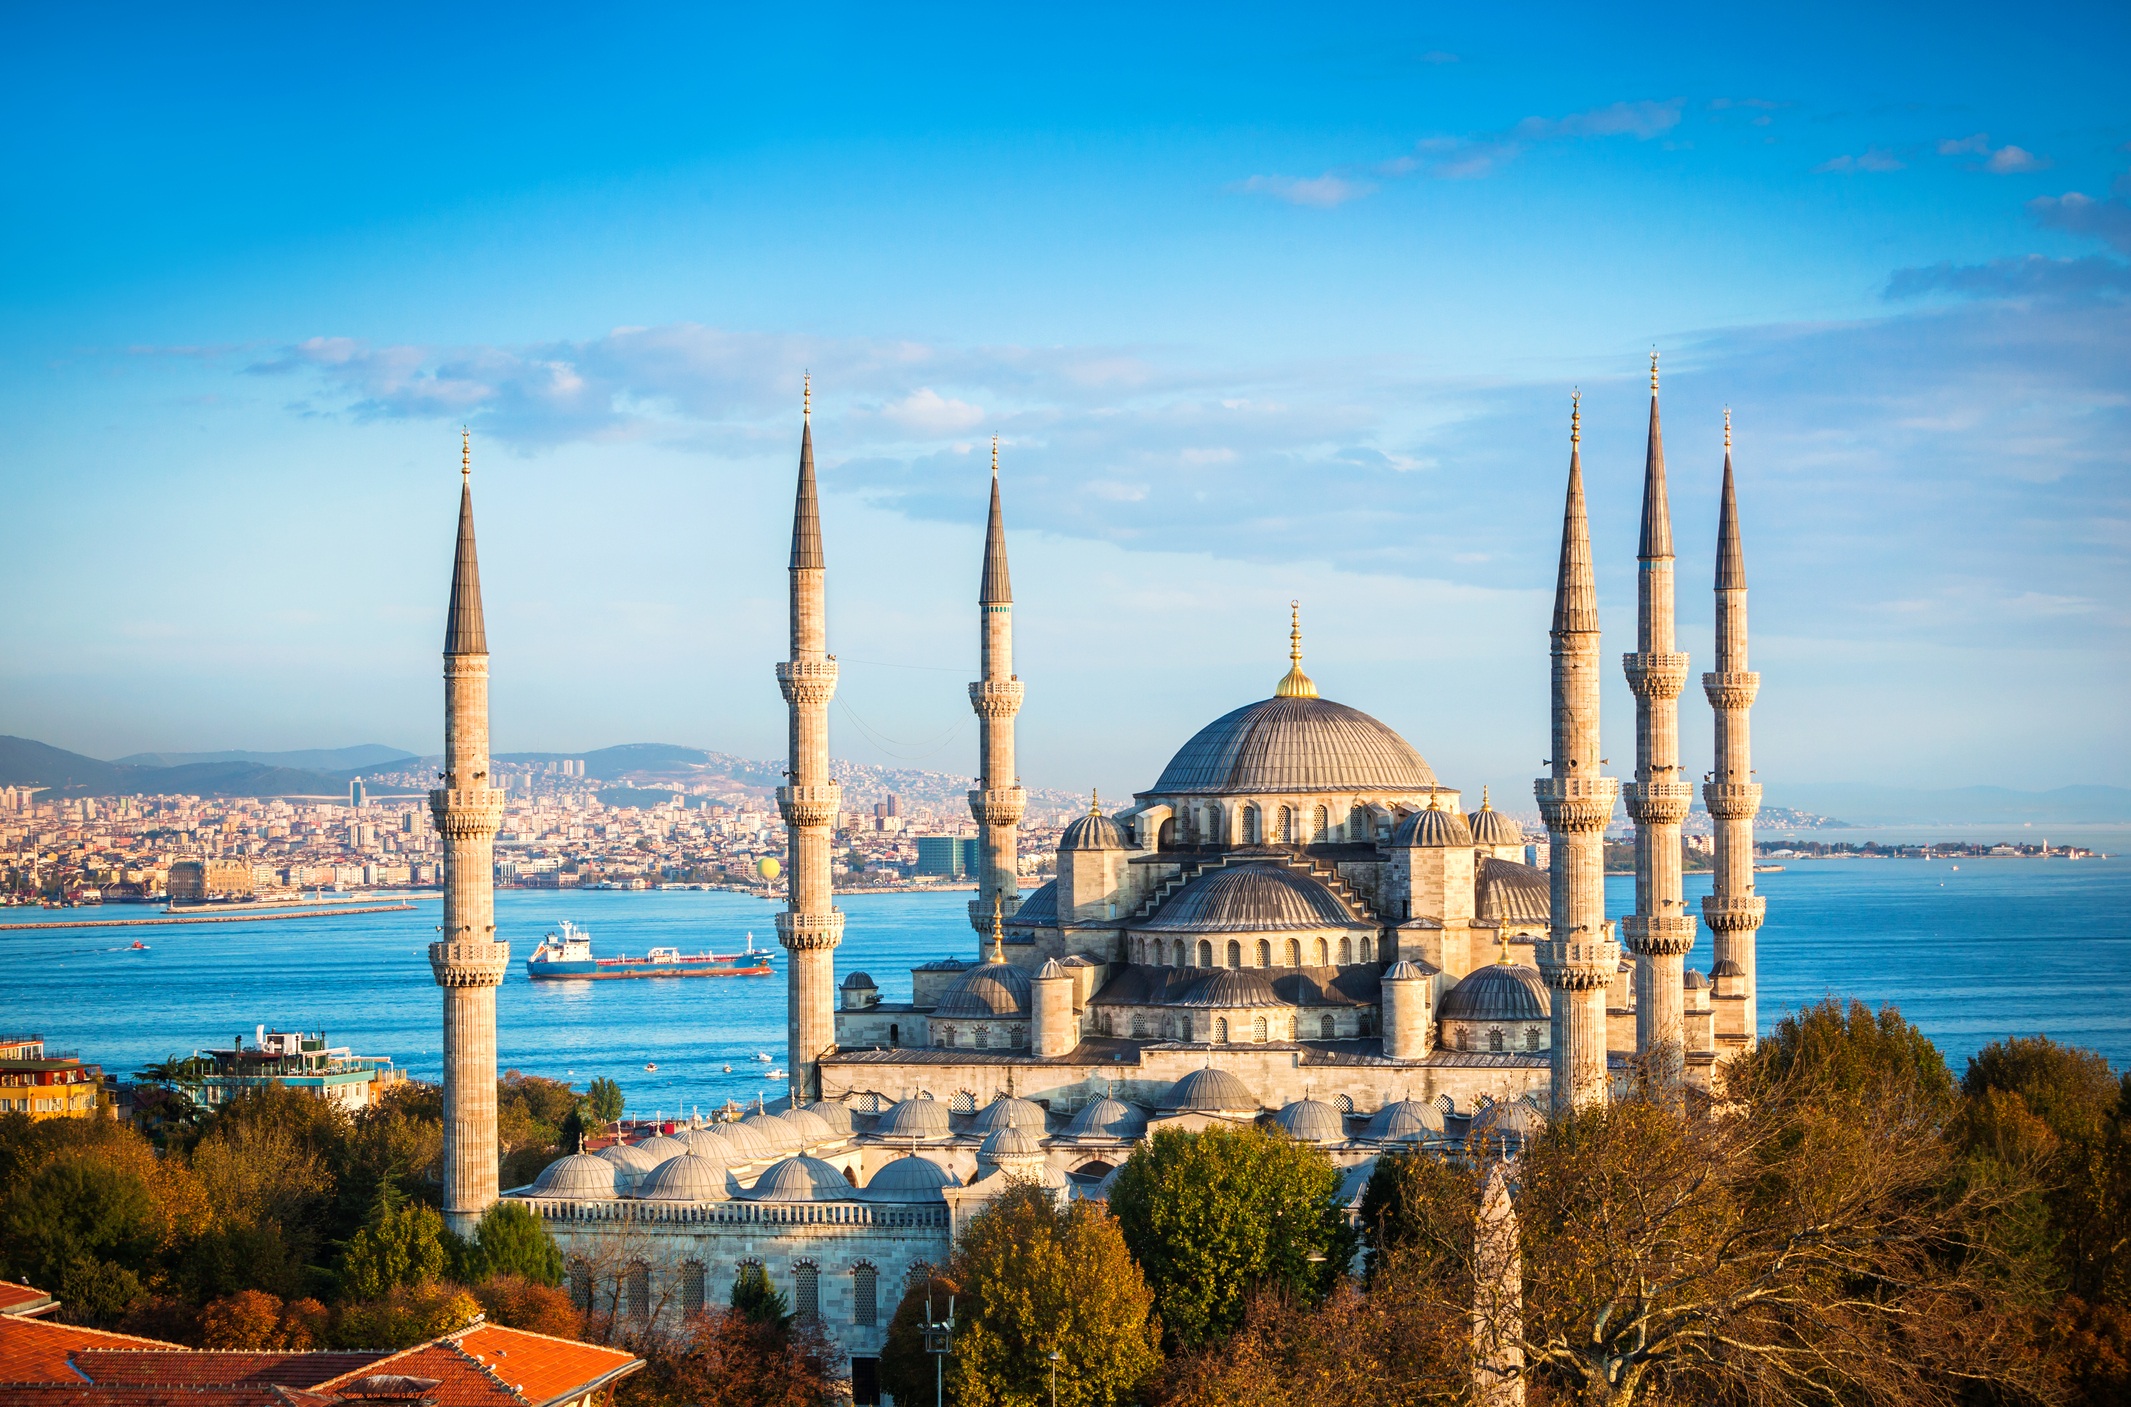 A photo of the Blue mosque in Istanbul